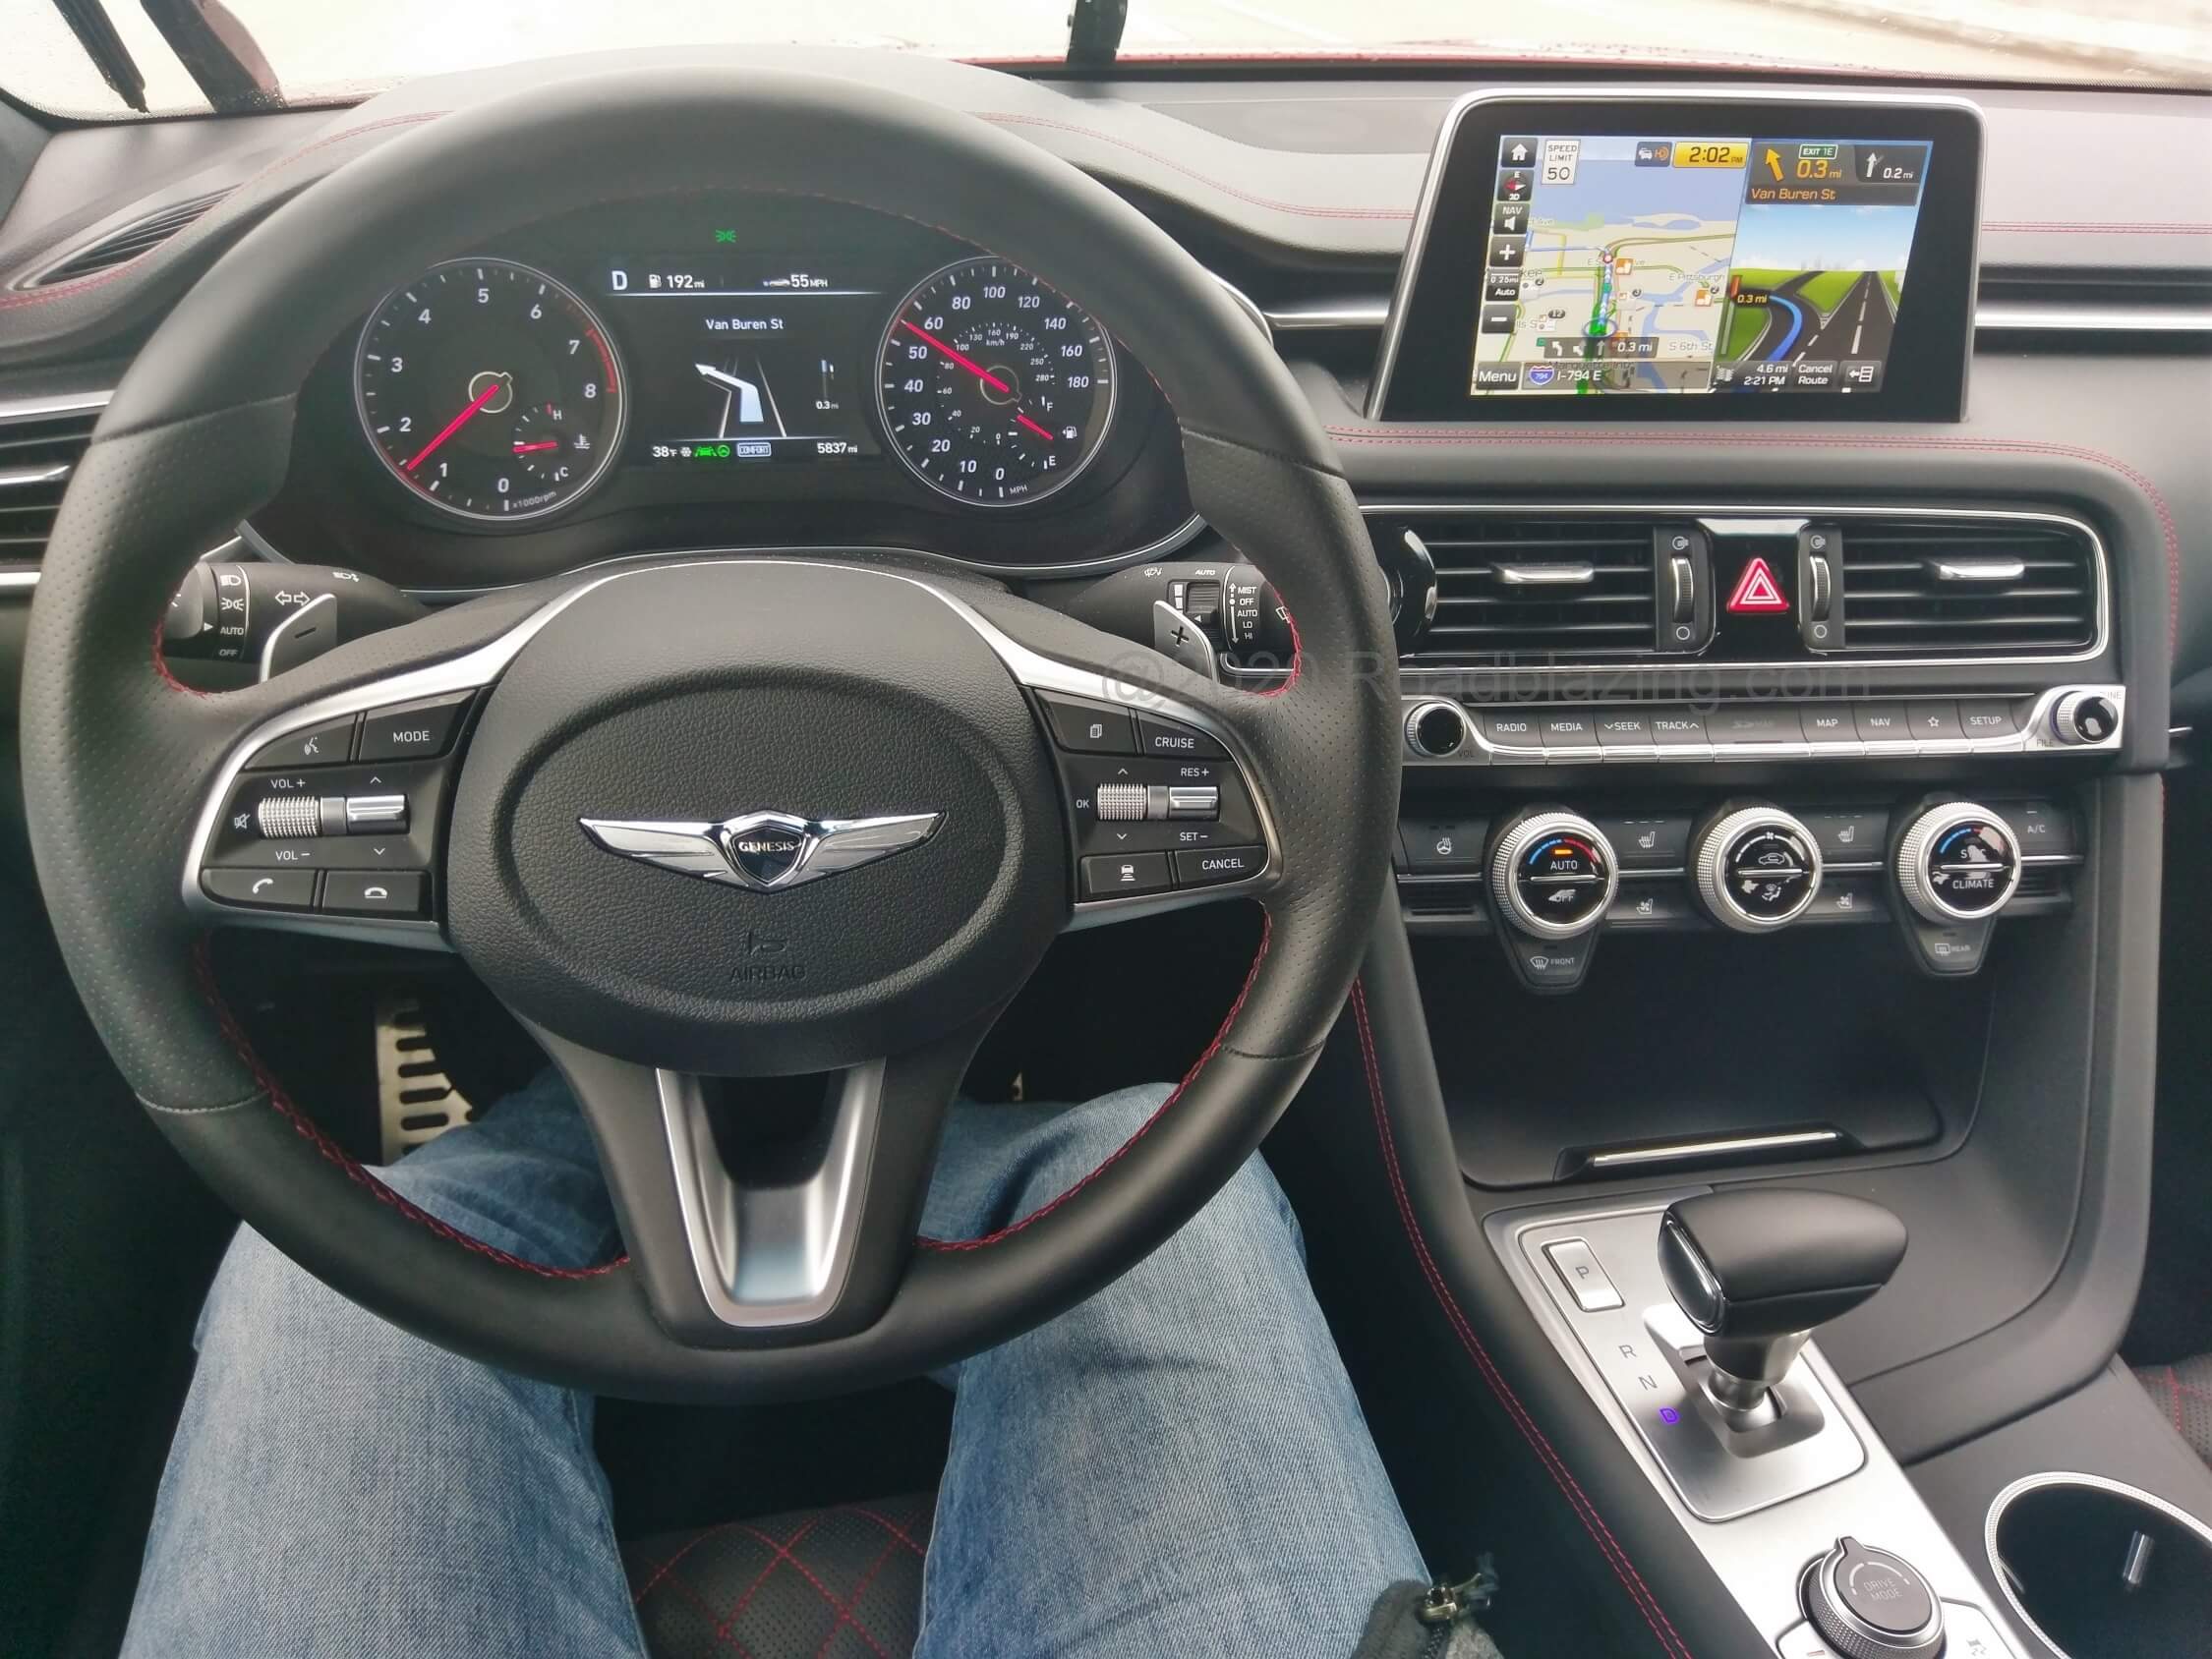 2020 Genesis G70 AWD 3.3T Sport: navigation 8" inch media display split map w/ exits supplemented by gauge cluster turn by turn directions